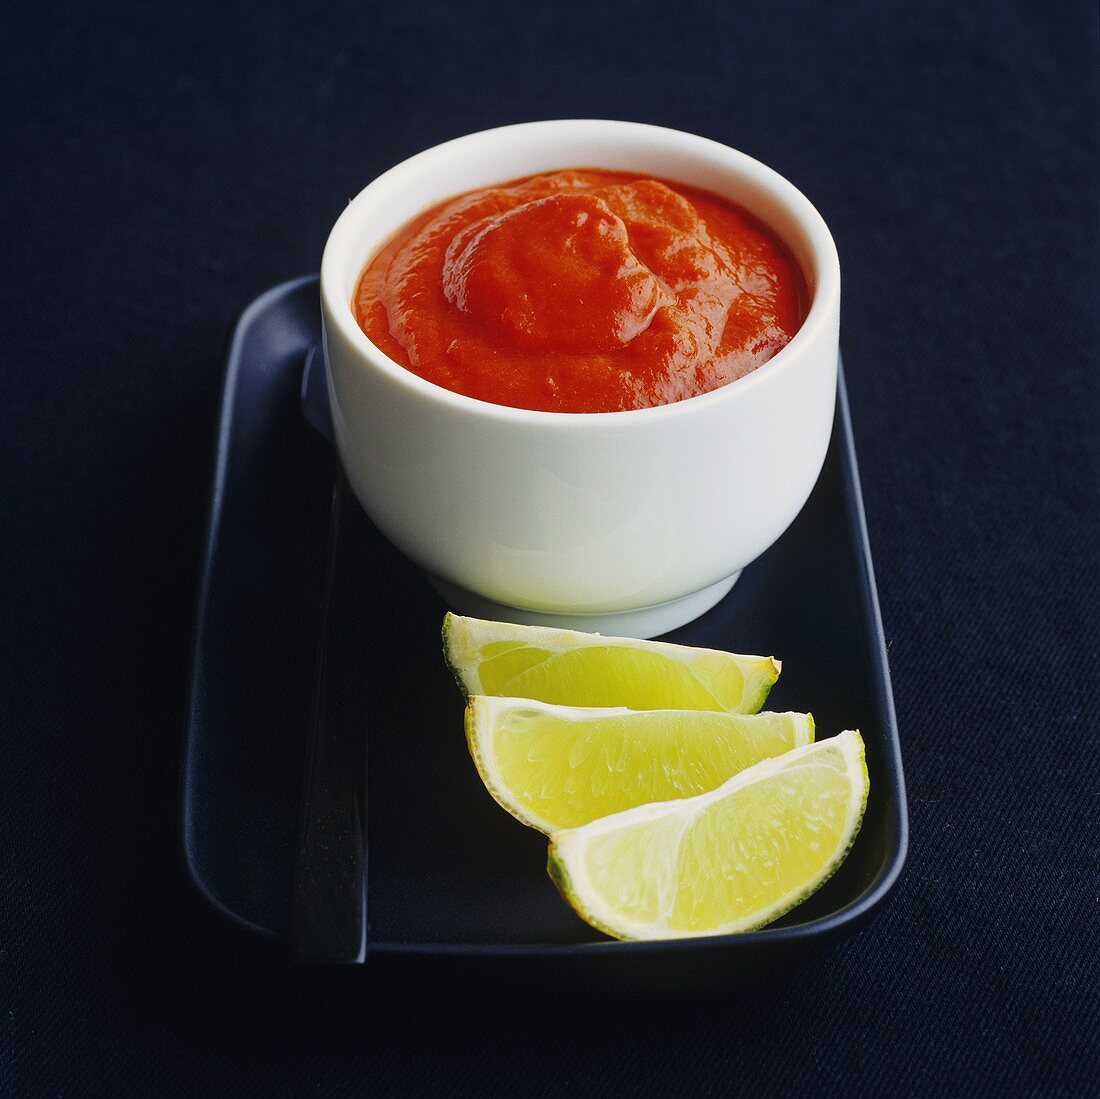 Chilli sauce with lime wedges